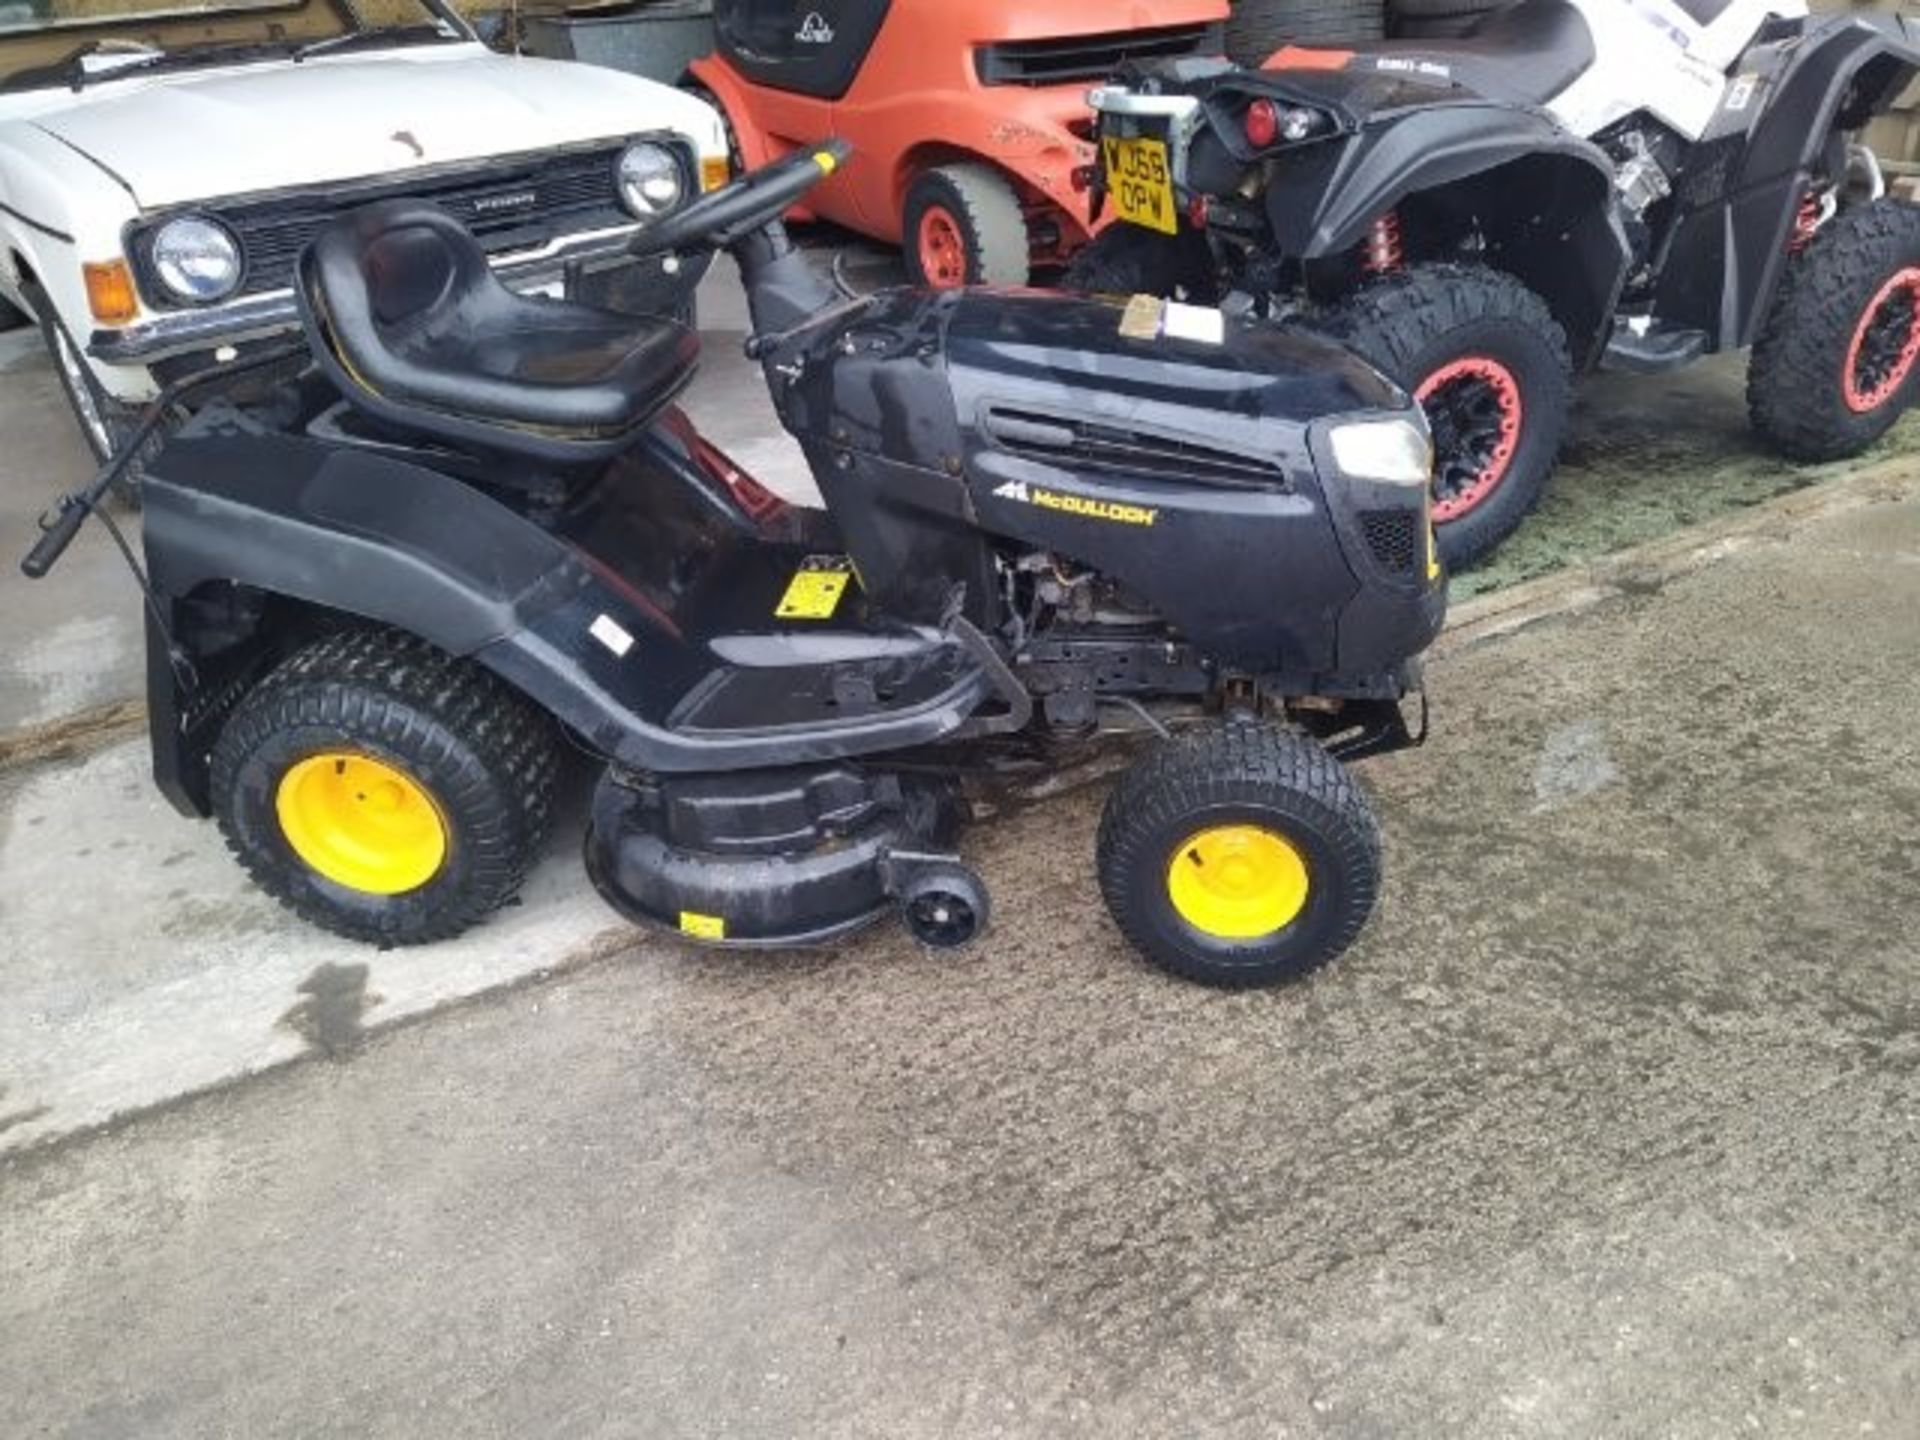 McCulloch Ride-on-Mower, free loading onto purchas - Image 2 of 4